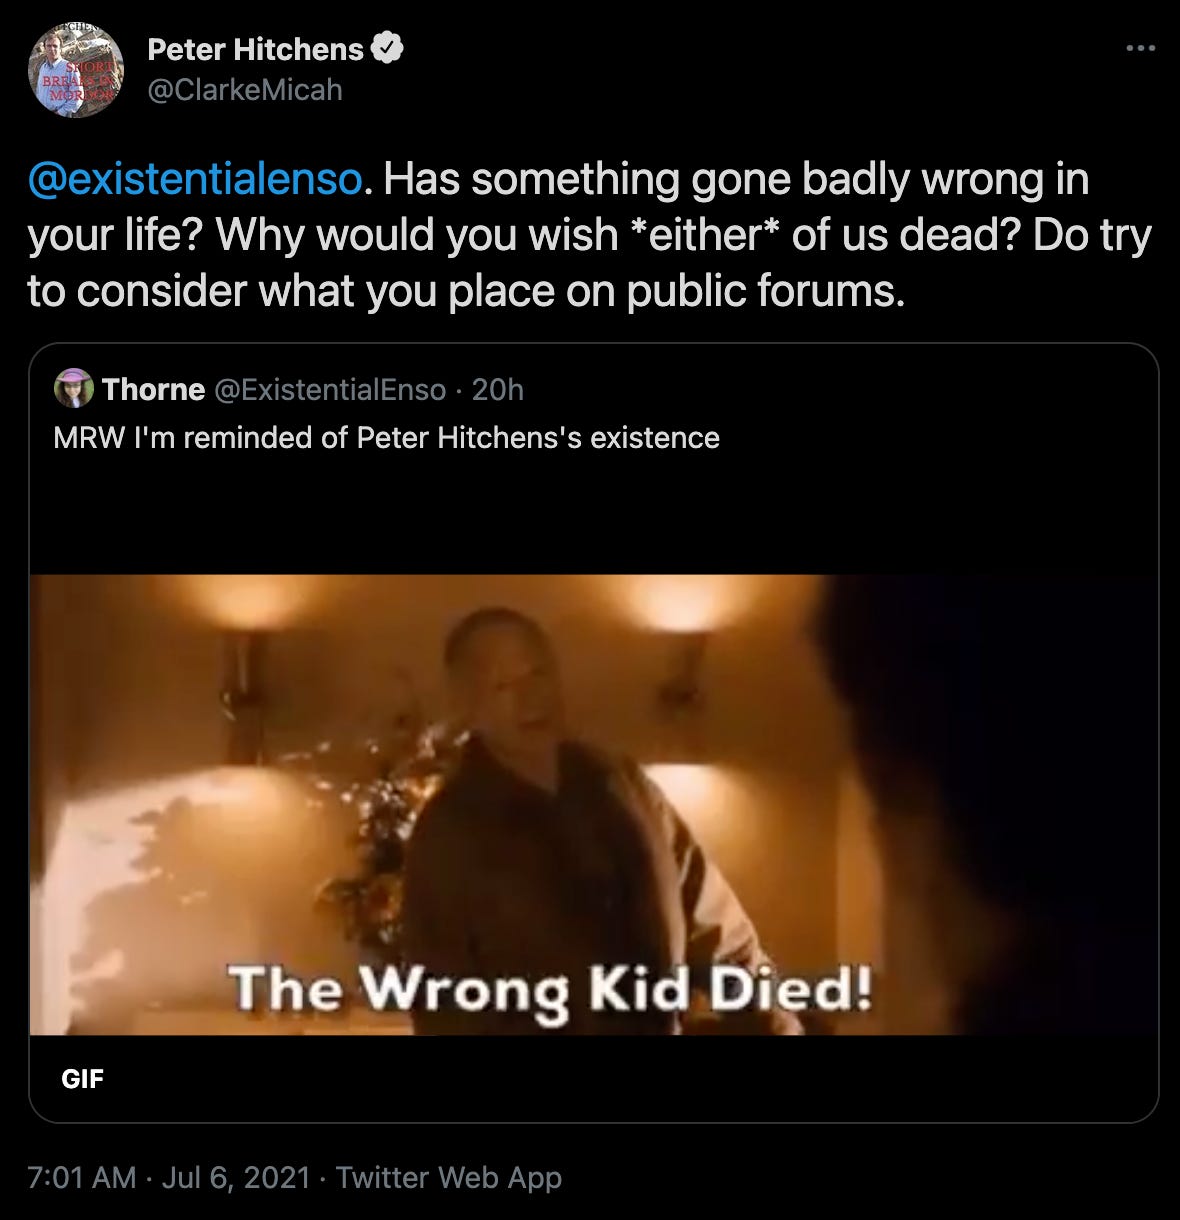 Tweet from Peter Hitchens stating: @existentialenso . Has something gone badly wrong in your life? Why would you wish *either* of us dead? Do try to consider what you place on public forums.